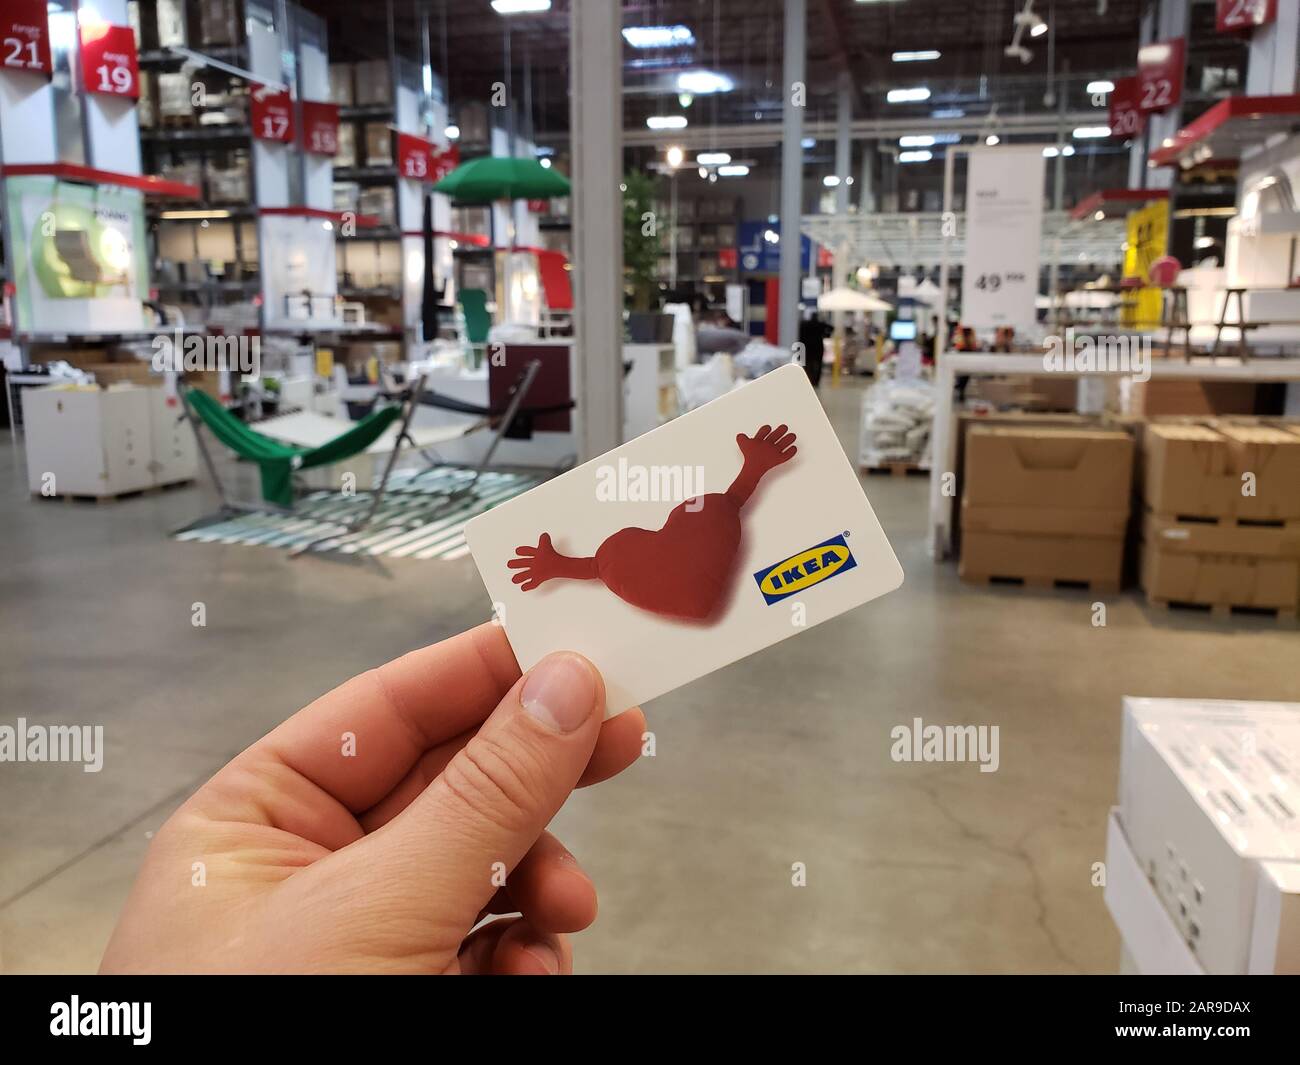 Montreal, Canada - April 10, 2019: A hand holding IKEA gift card with heart  on it, over shelf. Scandinavian chain selling ready-to-assemble furniture  Stock Photo - Alamy